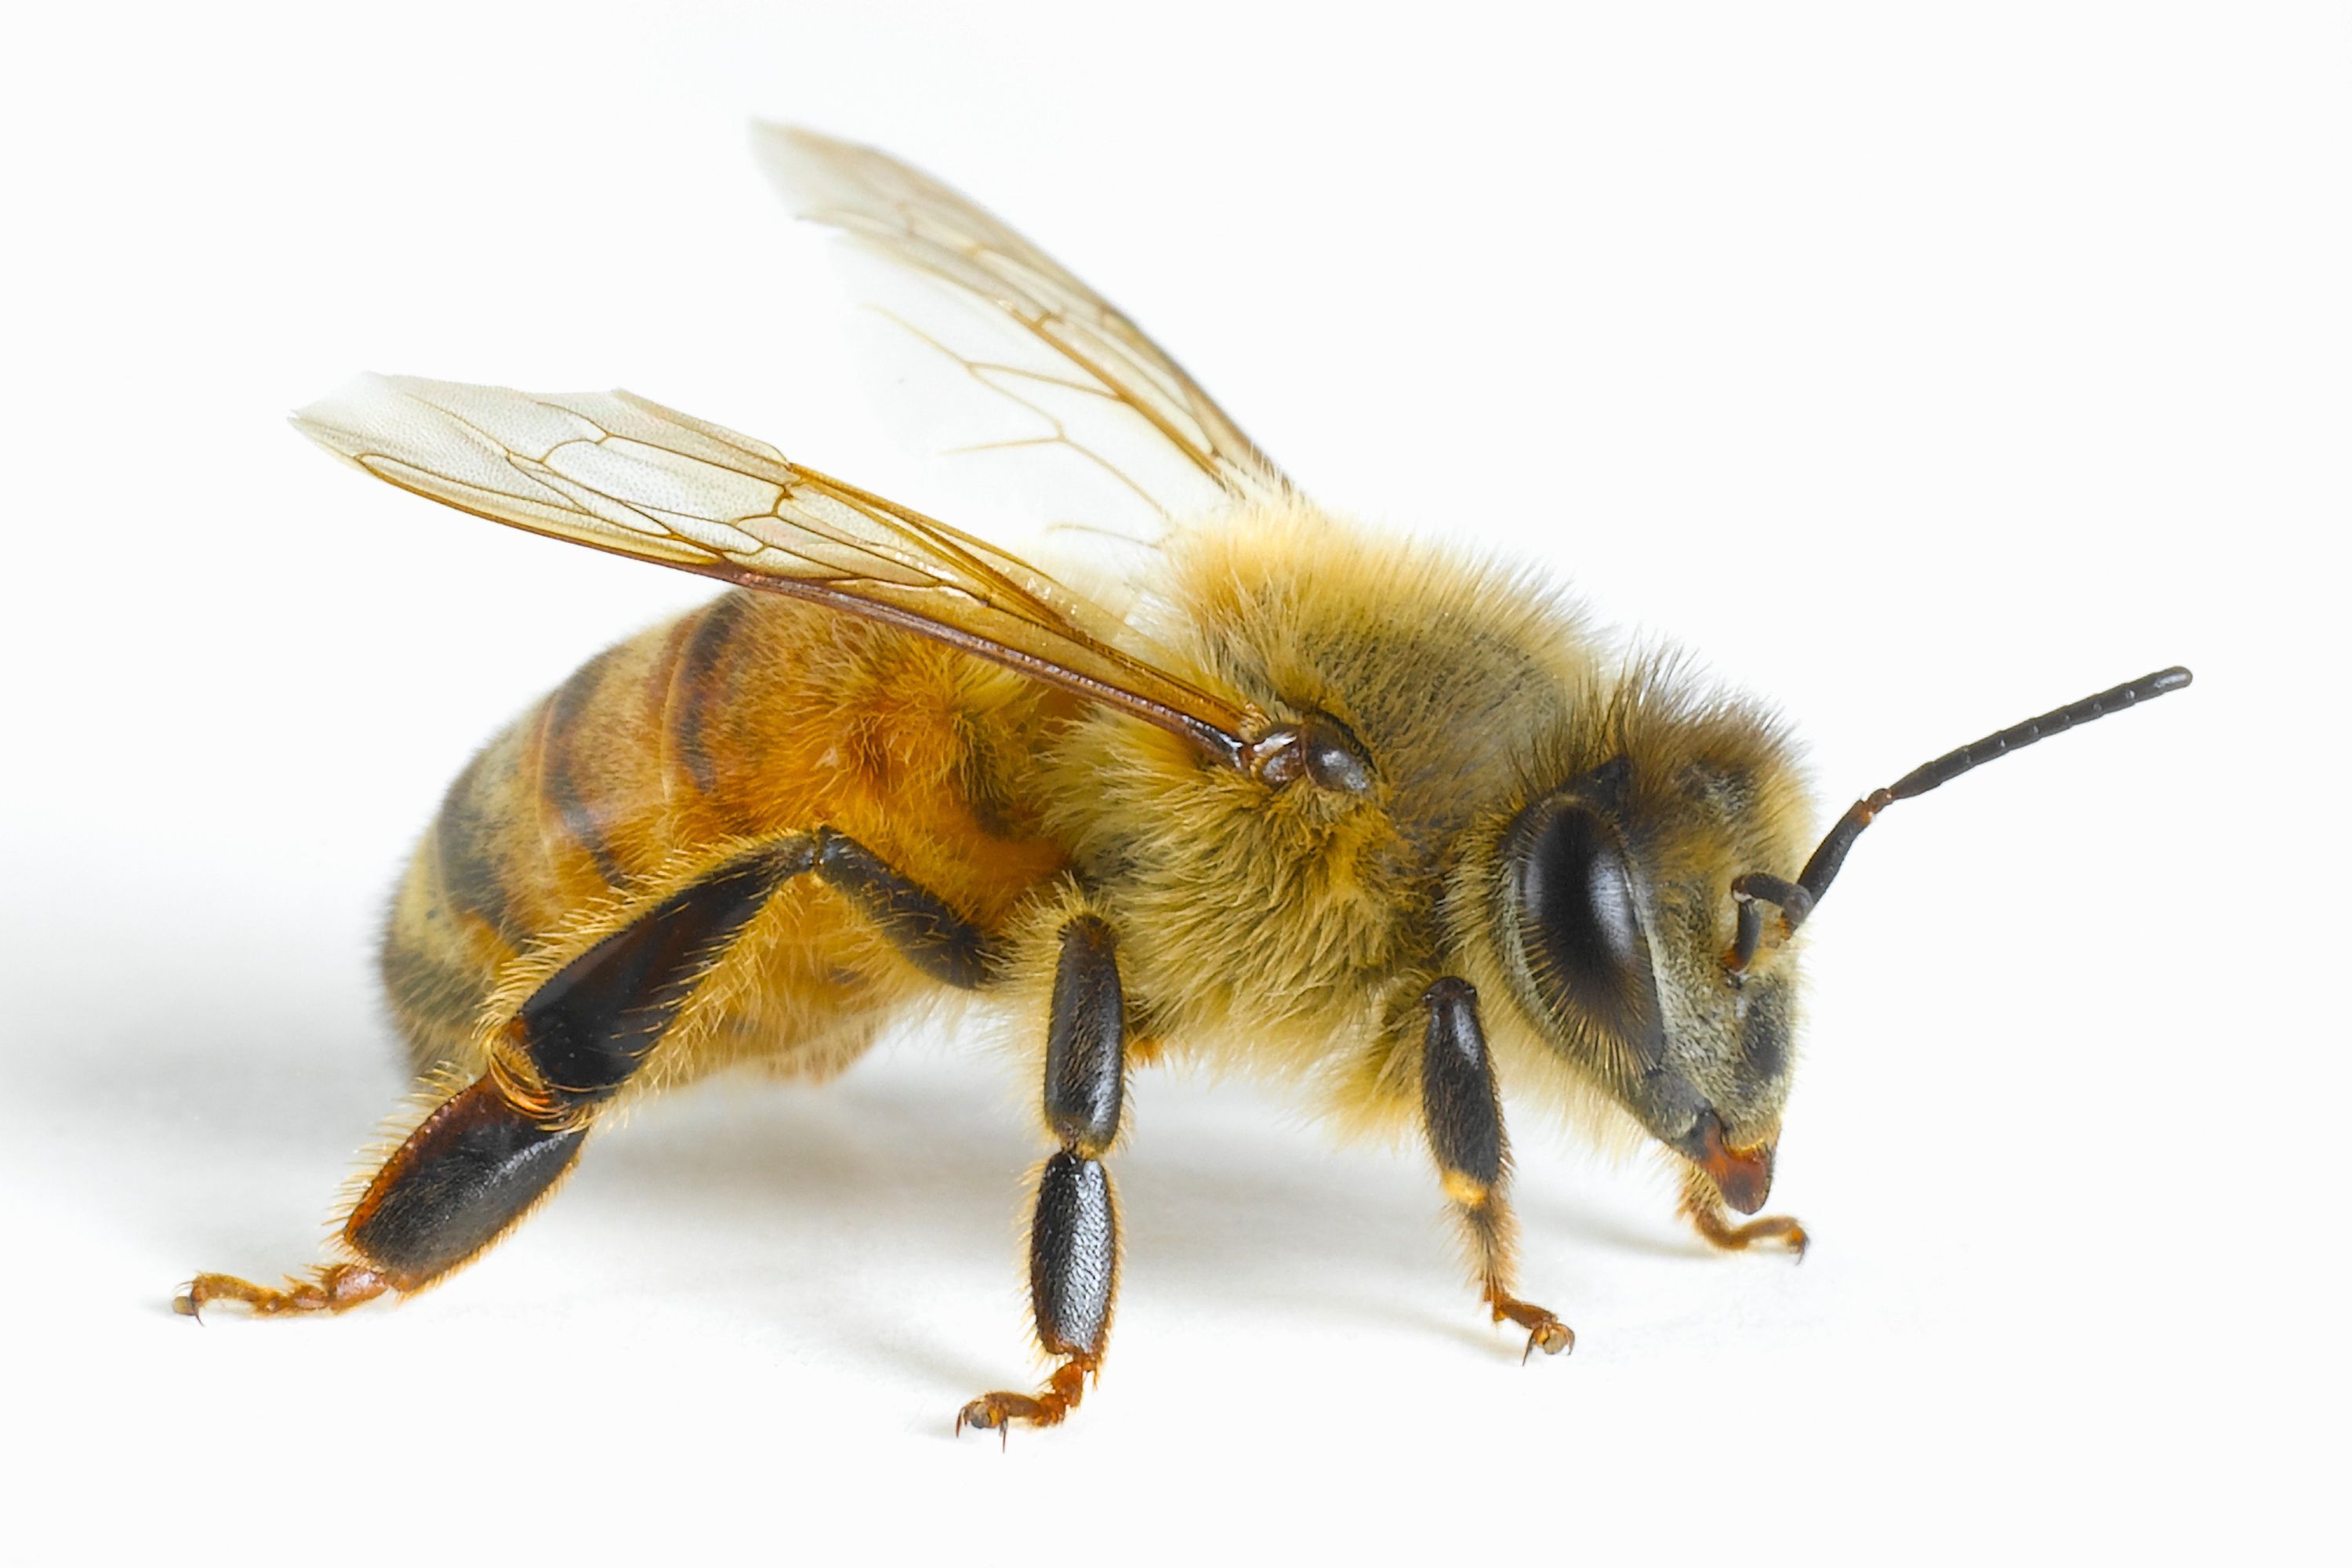 Utrecht University to open multi-disciplinary bee research facility